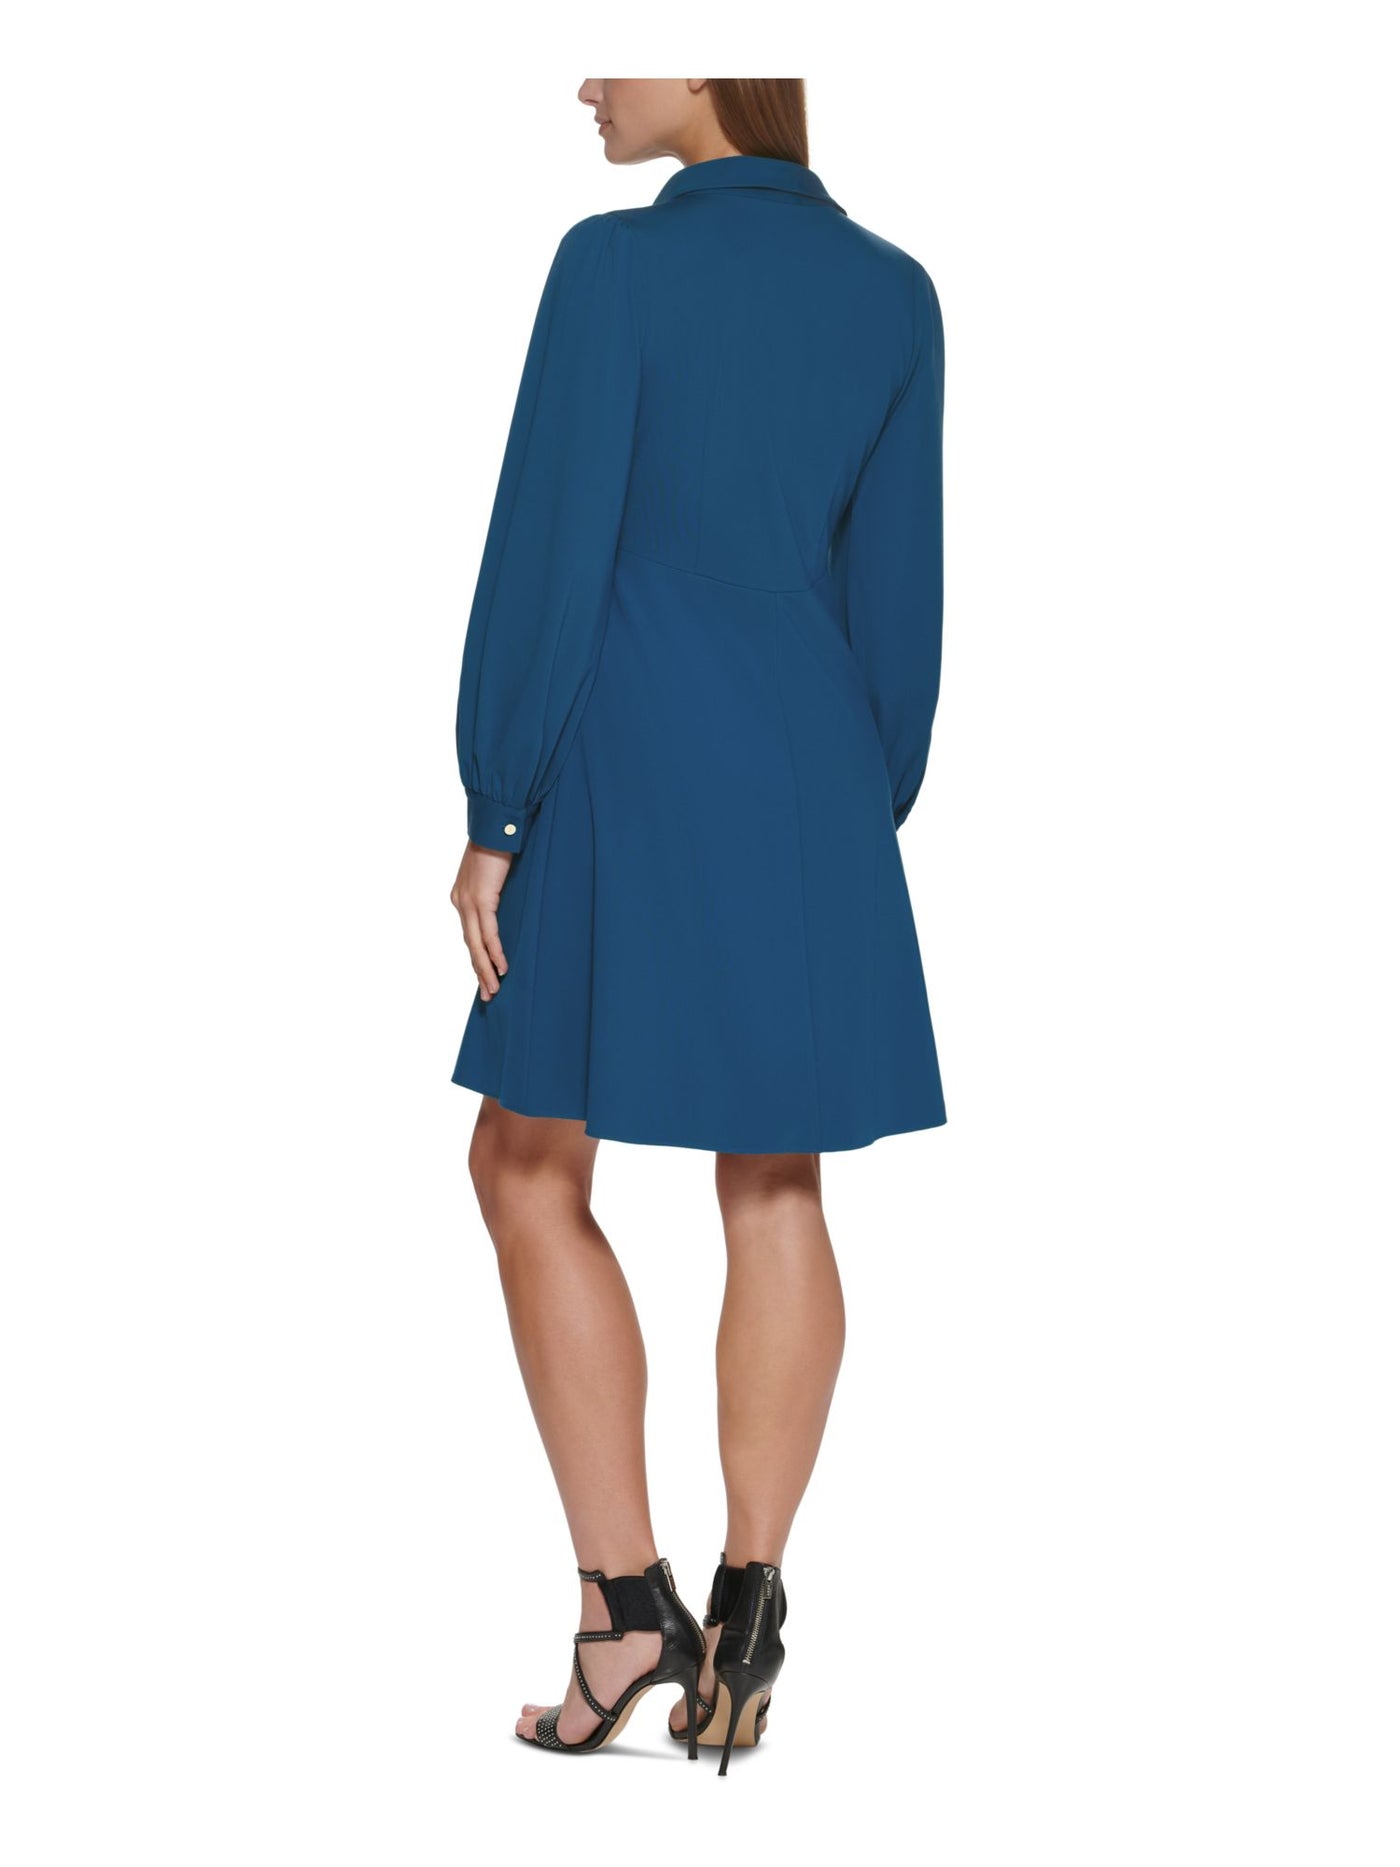 DKNY Womens Blue Stretch Darted Button Front 3/4 Sleeve Point Collar Above The Knee Wear To Work Fit + Flare Dress 14